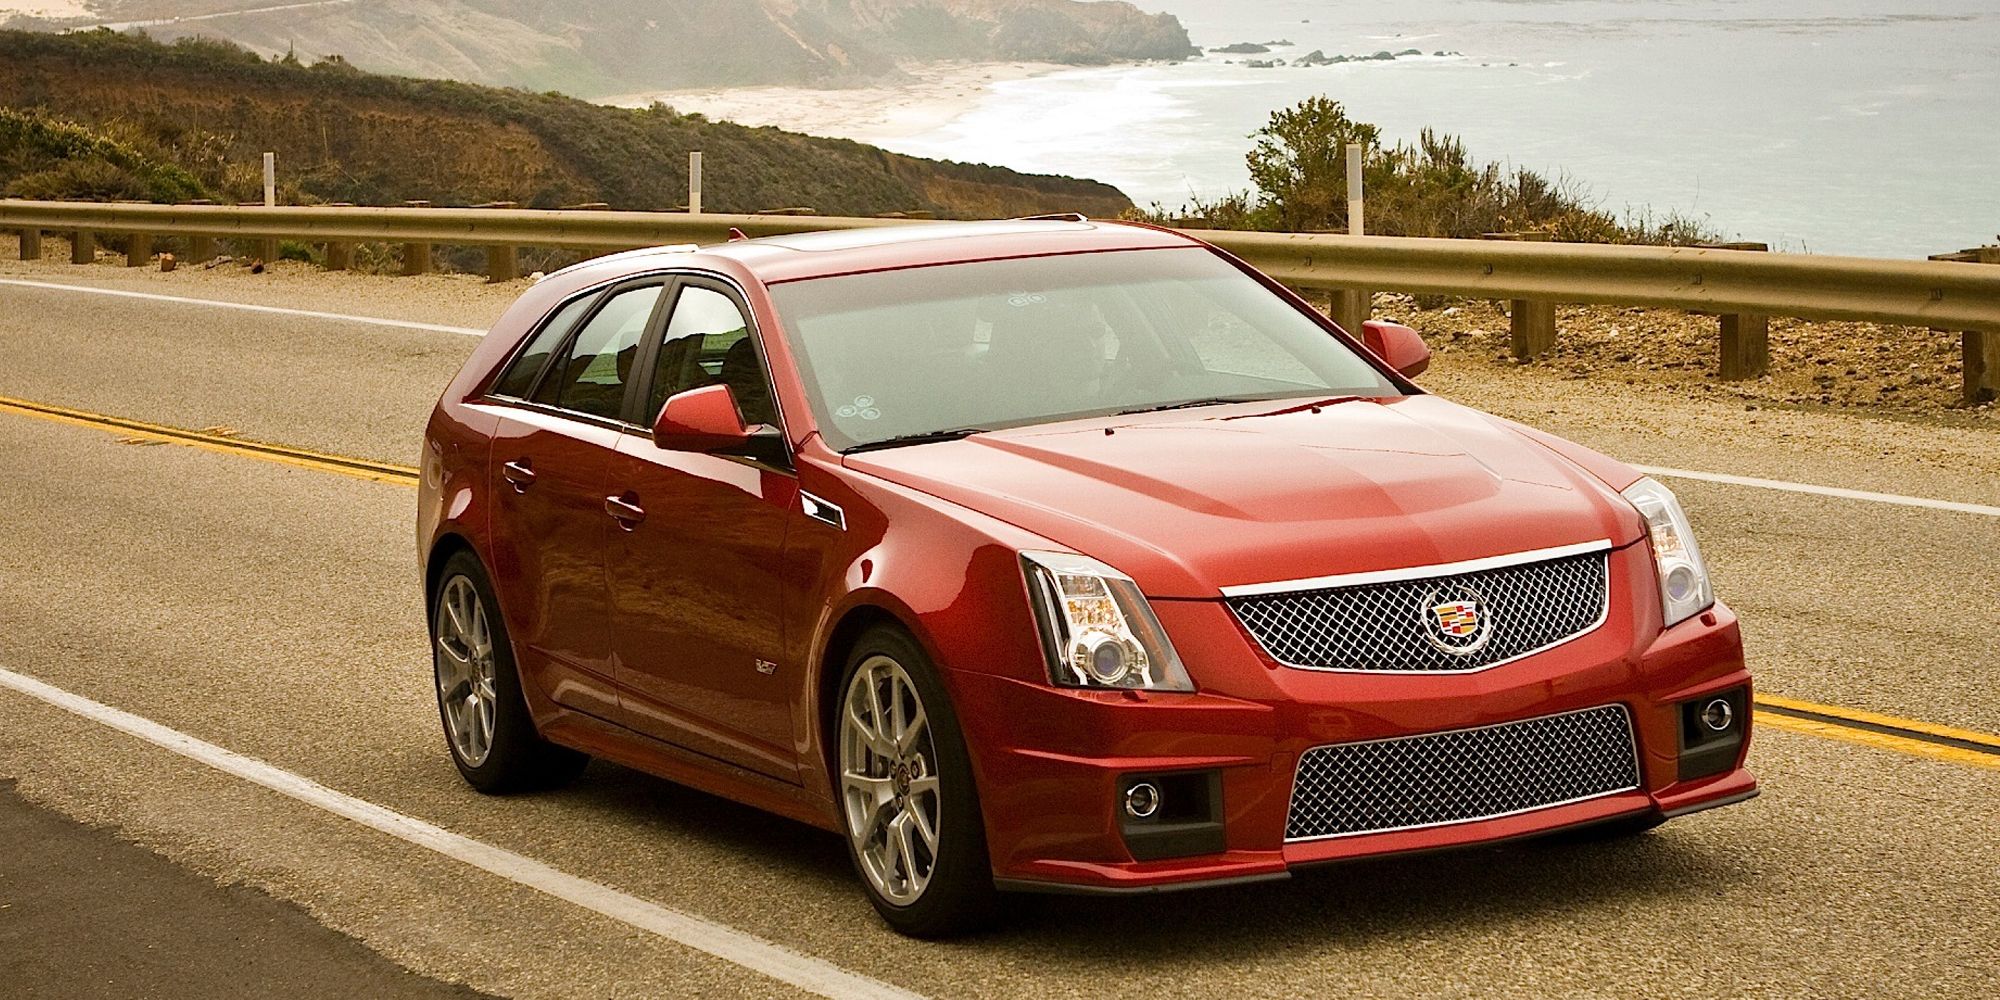 A CTS-V Wagon in red